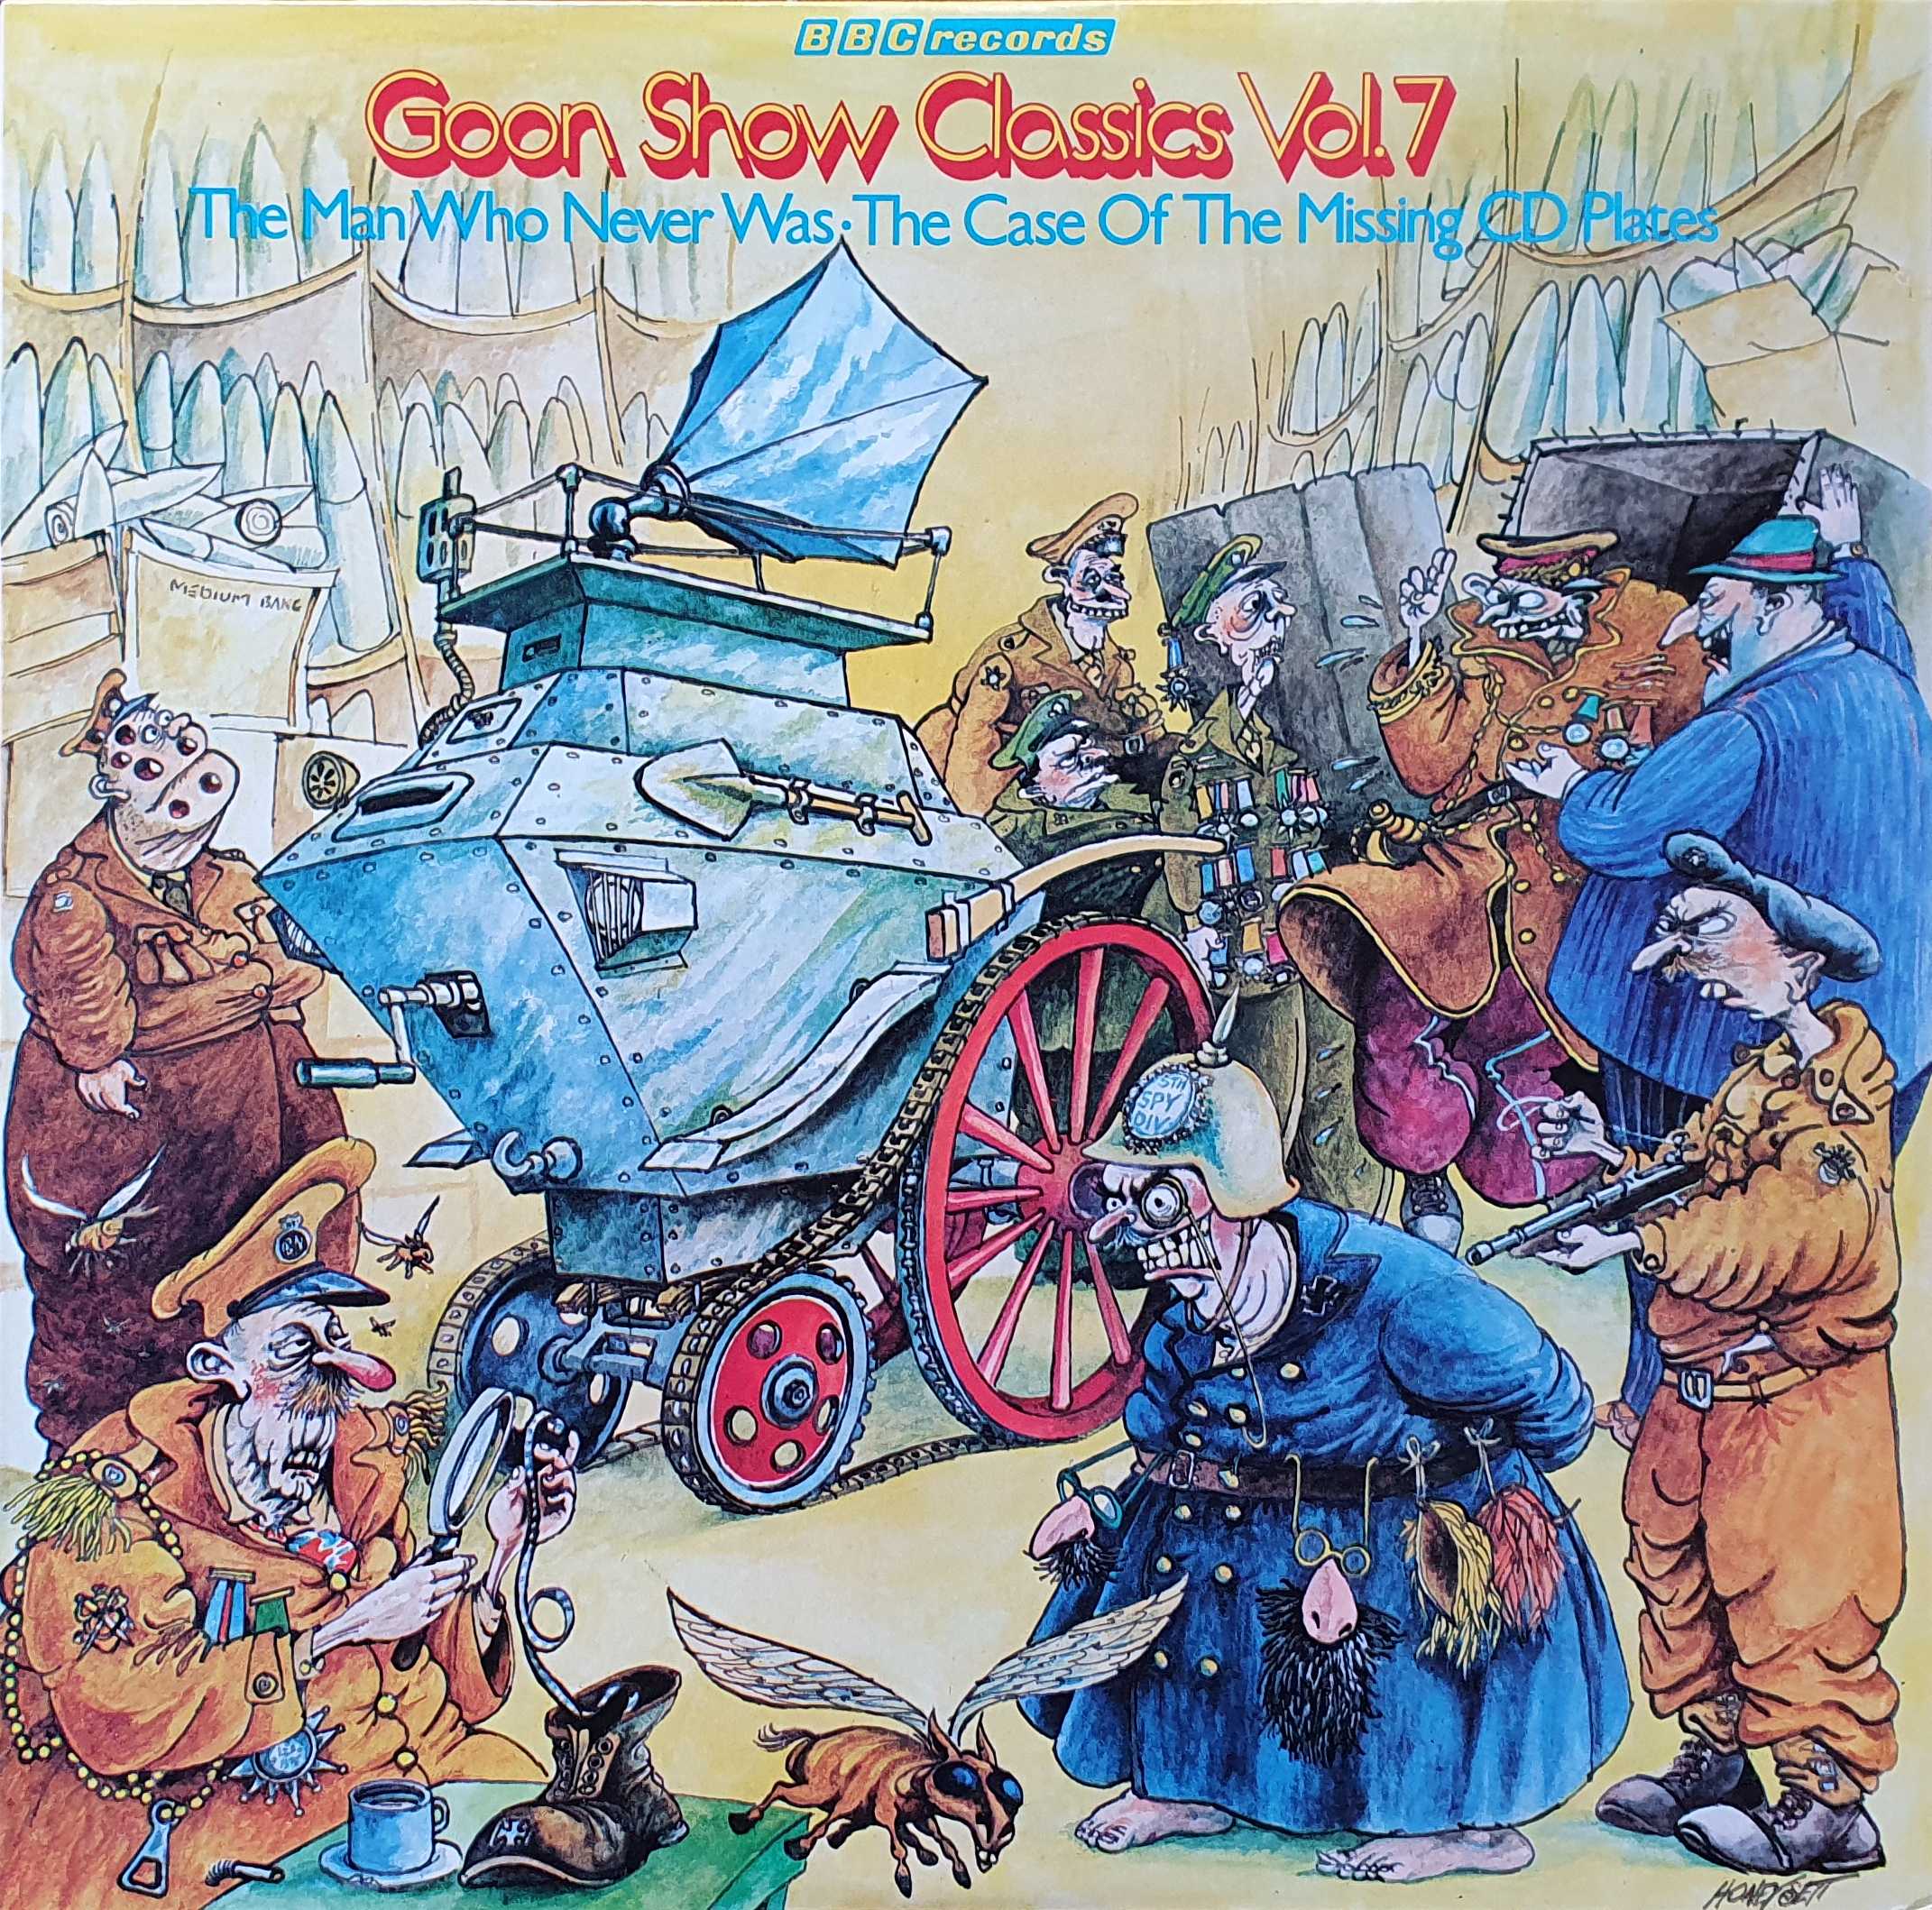 Picture of 2964 058 Goon Show classics vol. 7 by artist The Goon Show